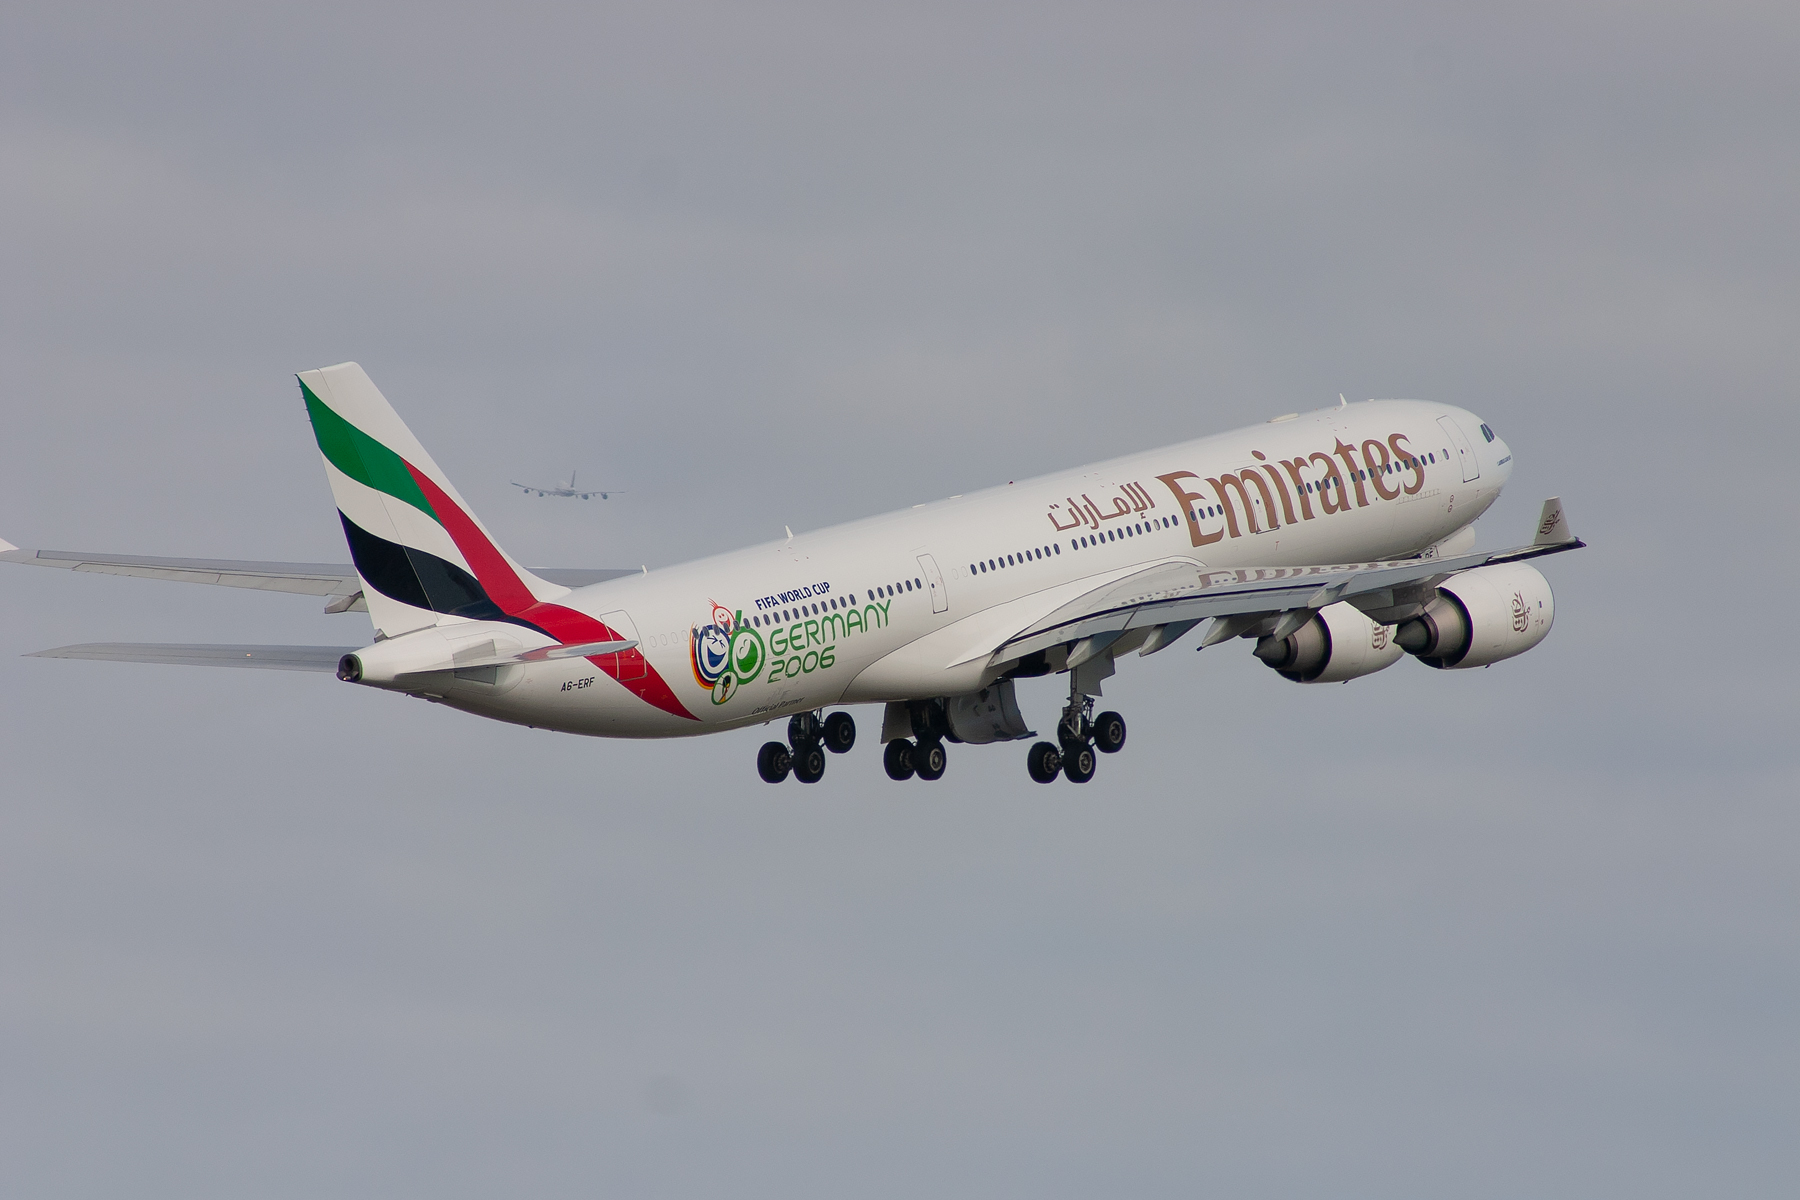 Emirates Airlines Airbus A340-500 A6-ERF at Kingsford Smith